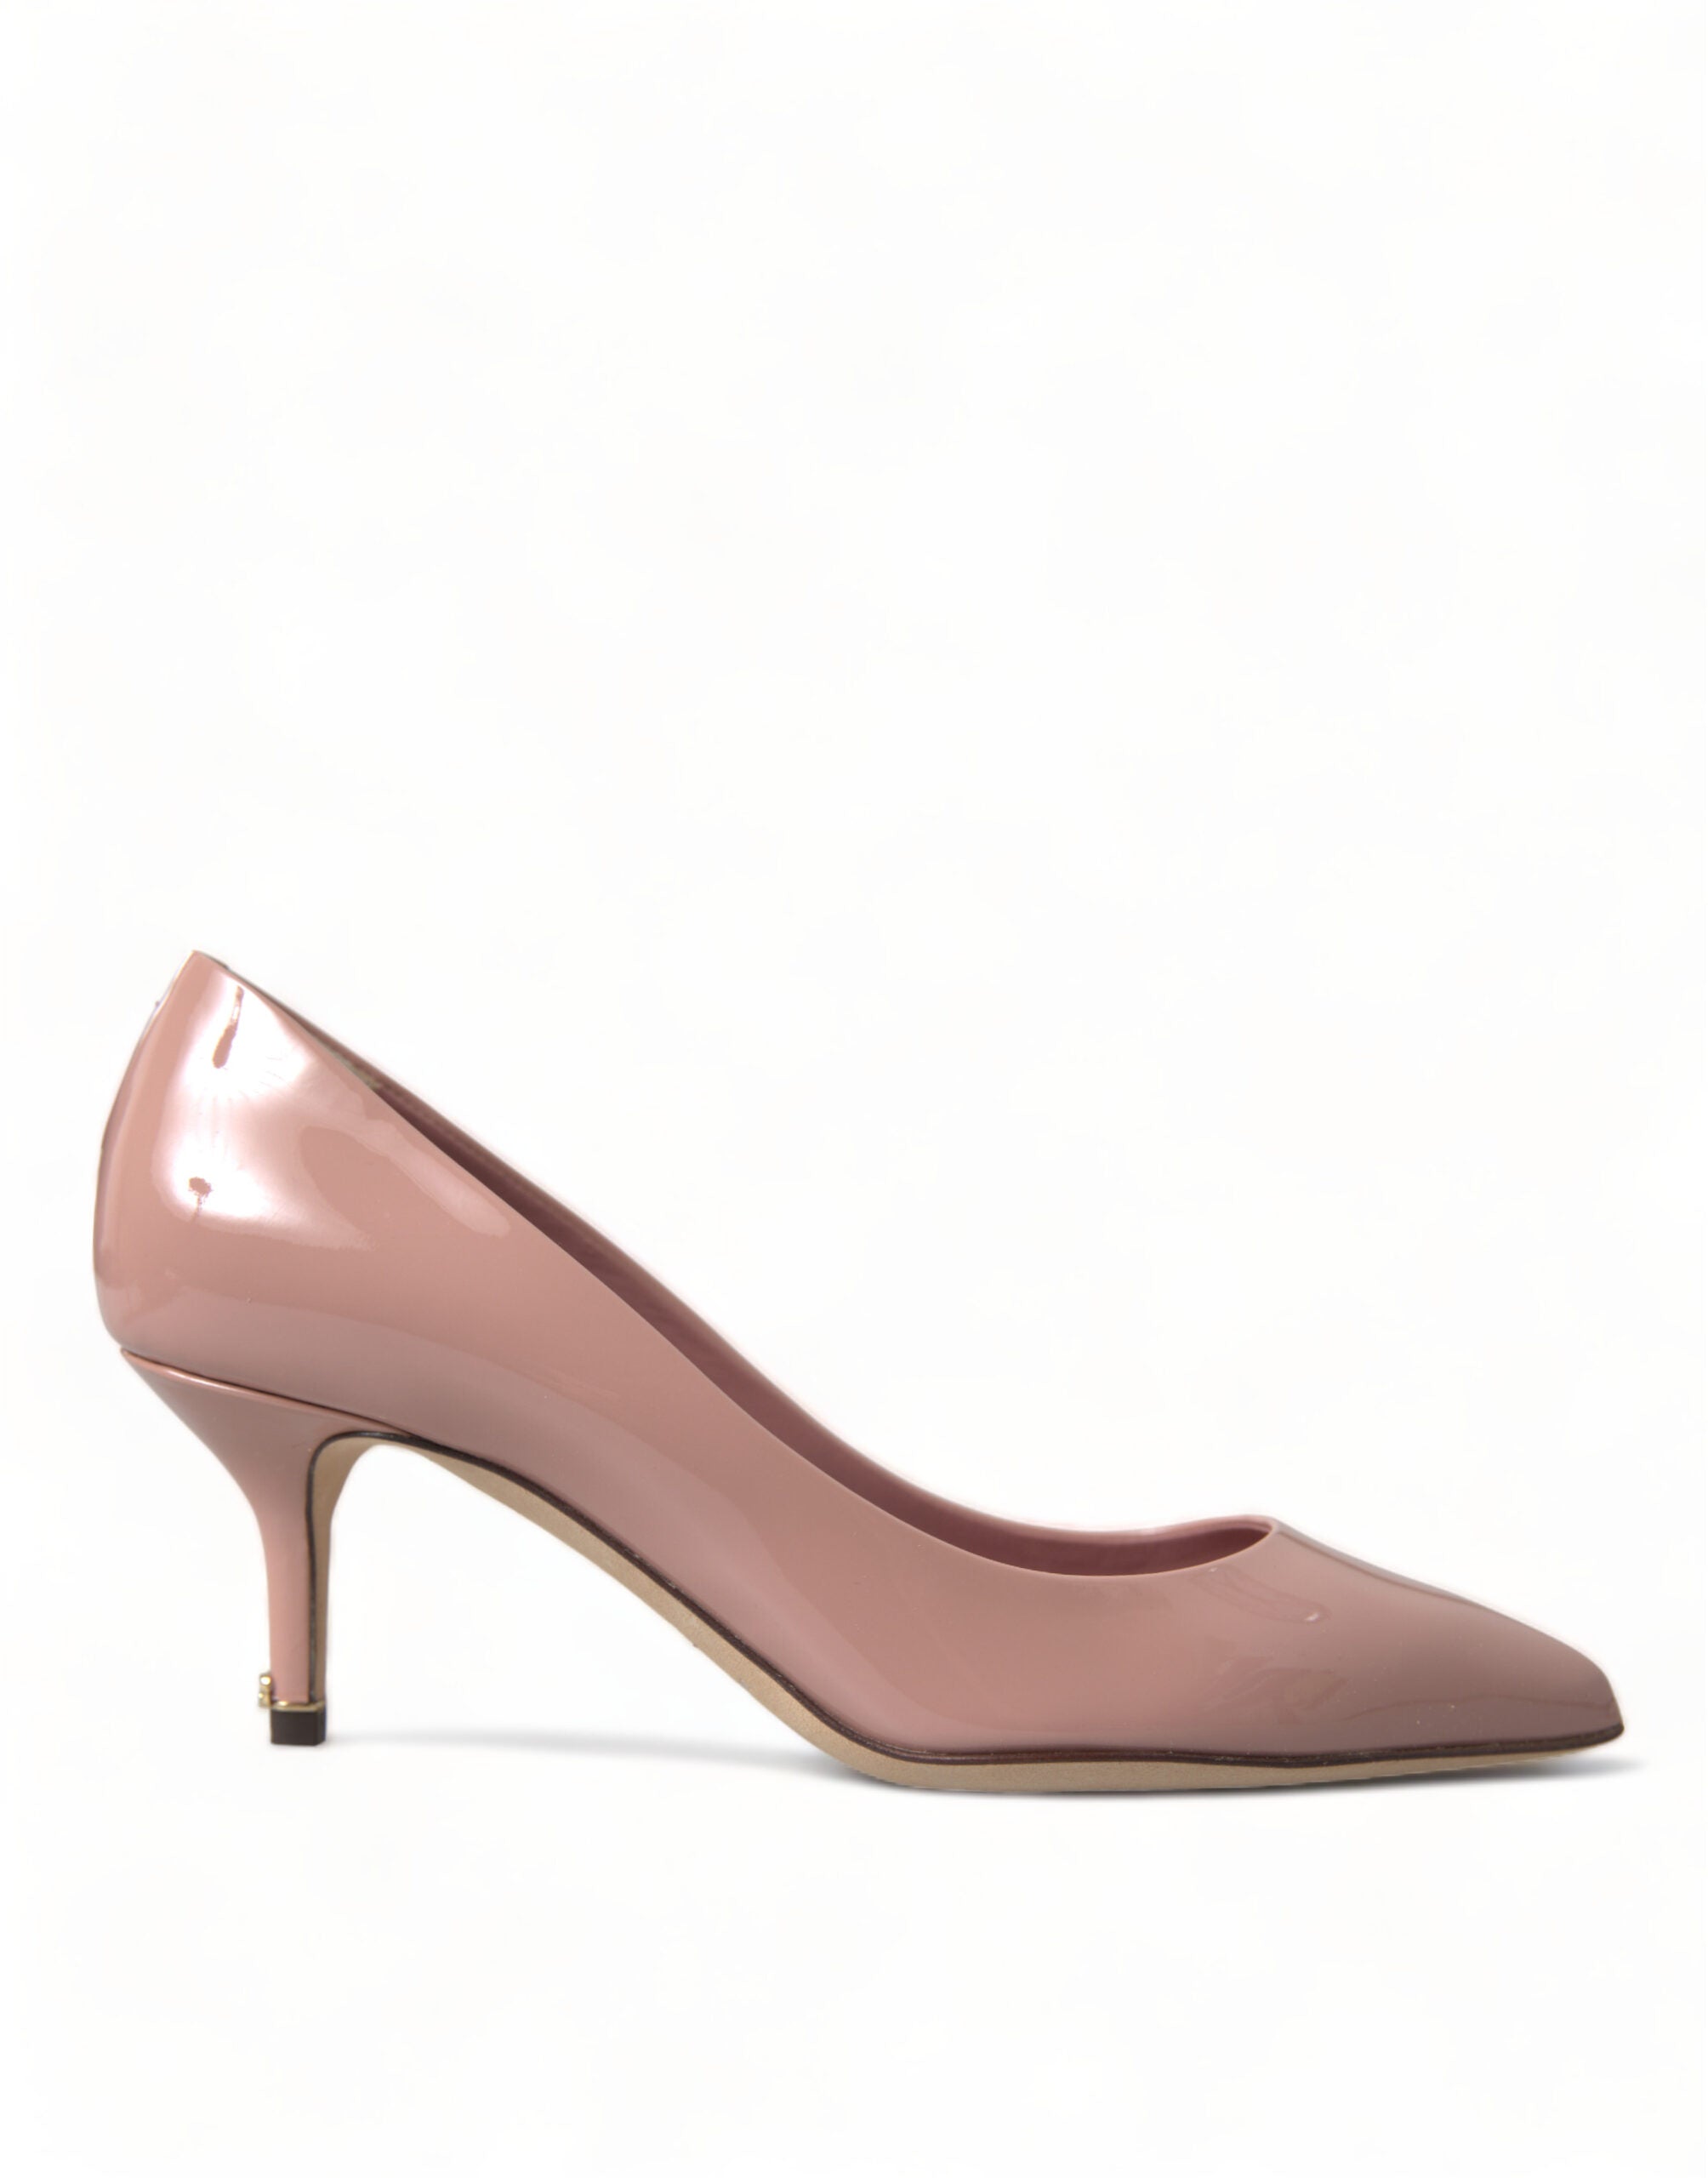 Pink Patent Stiletto Pumps - Elevate Your Glamour